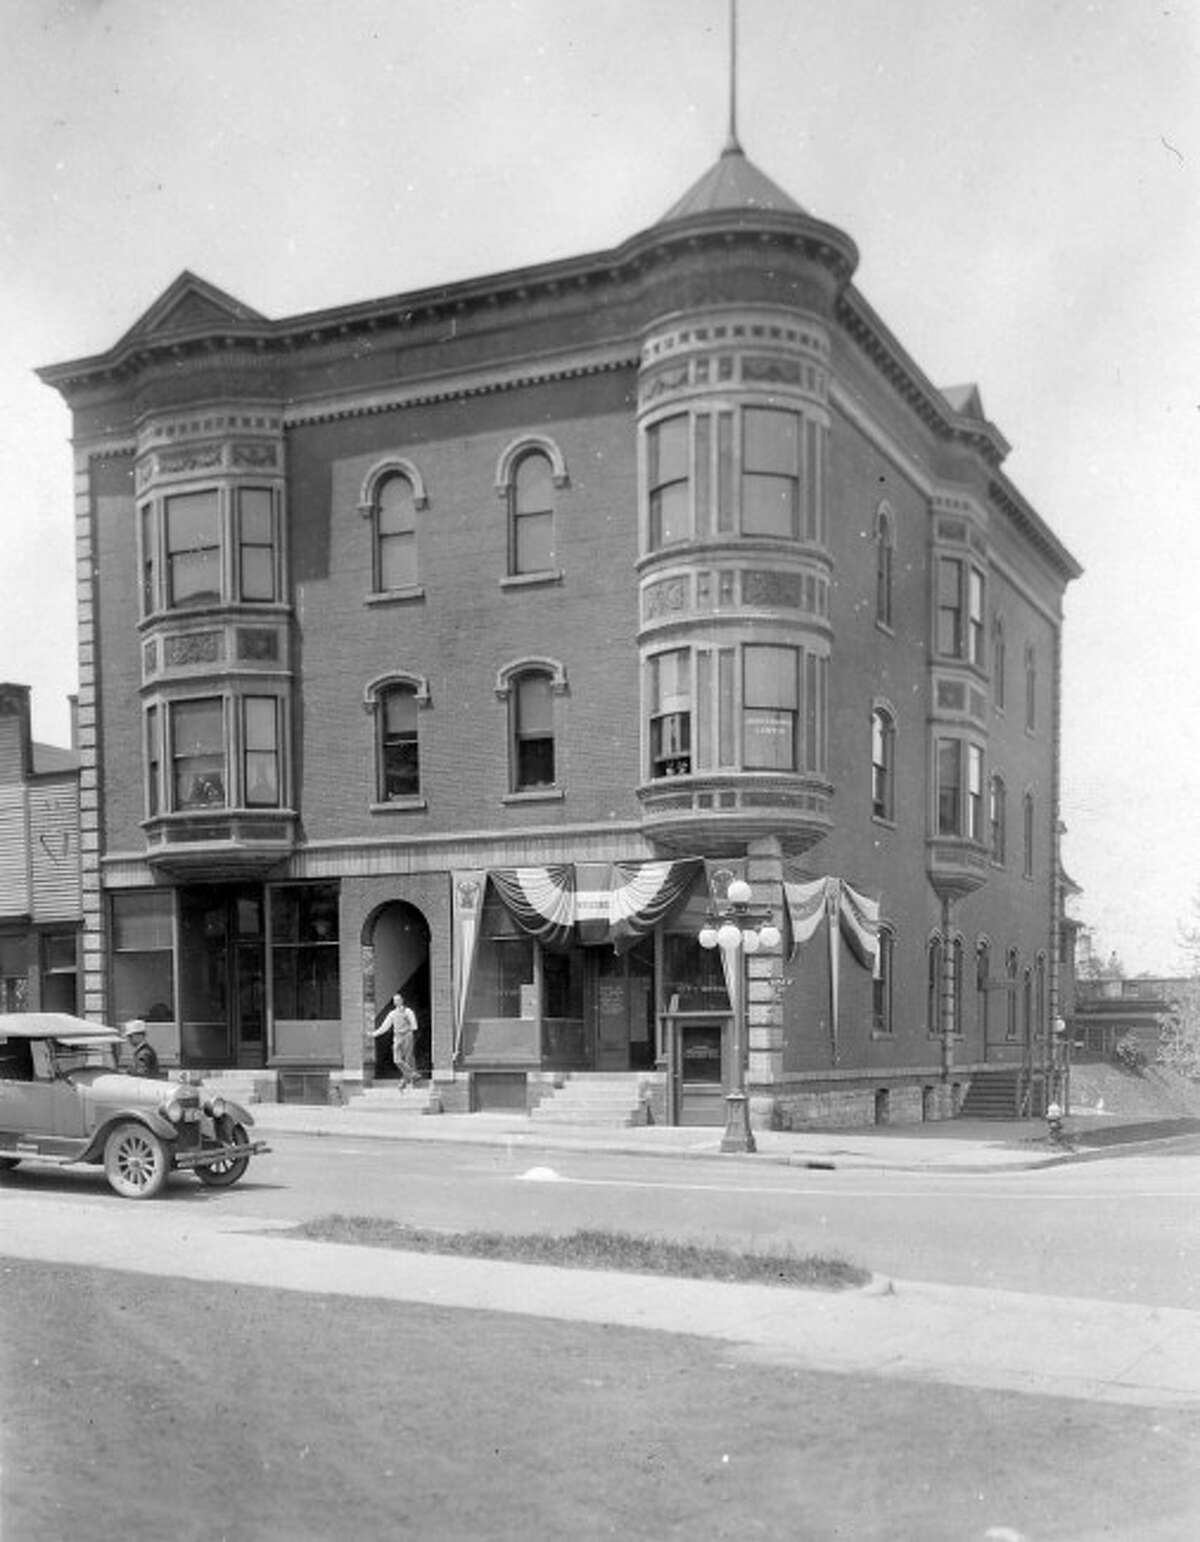 The city office building located at the corner of Maple and Water streets is shown in this 1930 photograph.